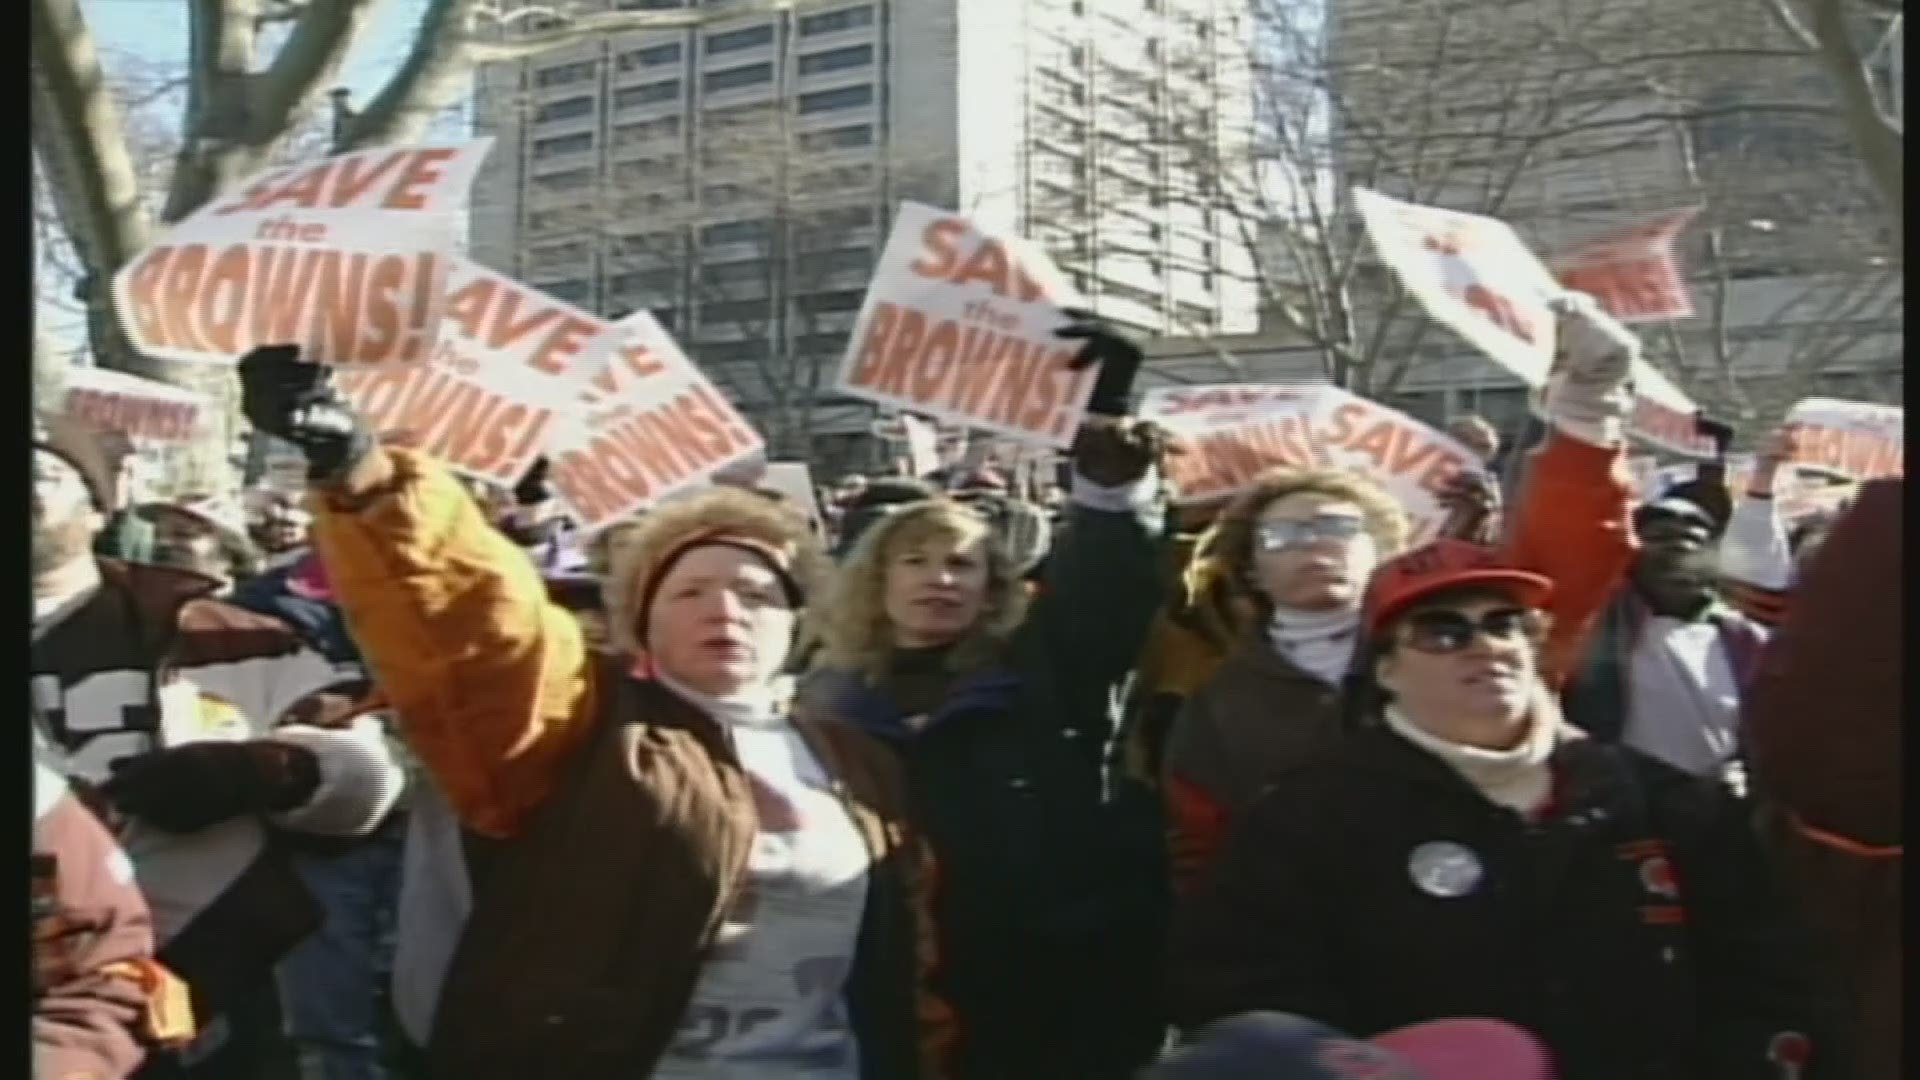 70 moments in WKYC history: Fans hold "Save our Browns" rally in 1995